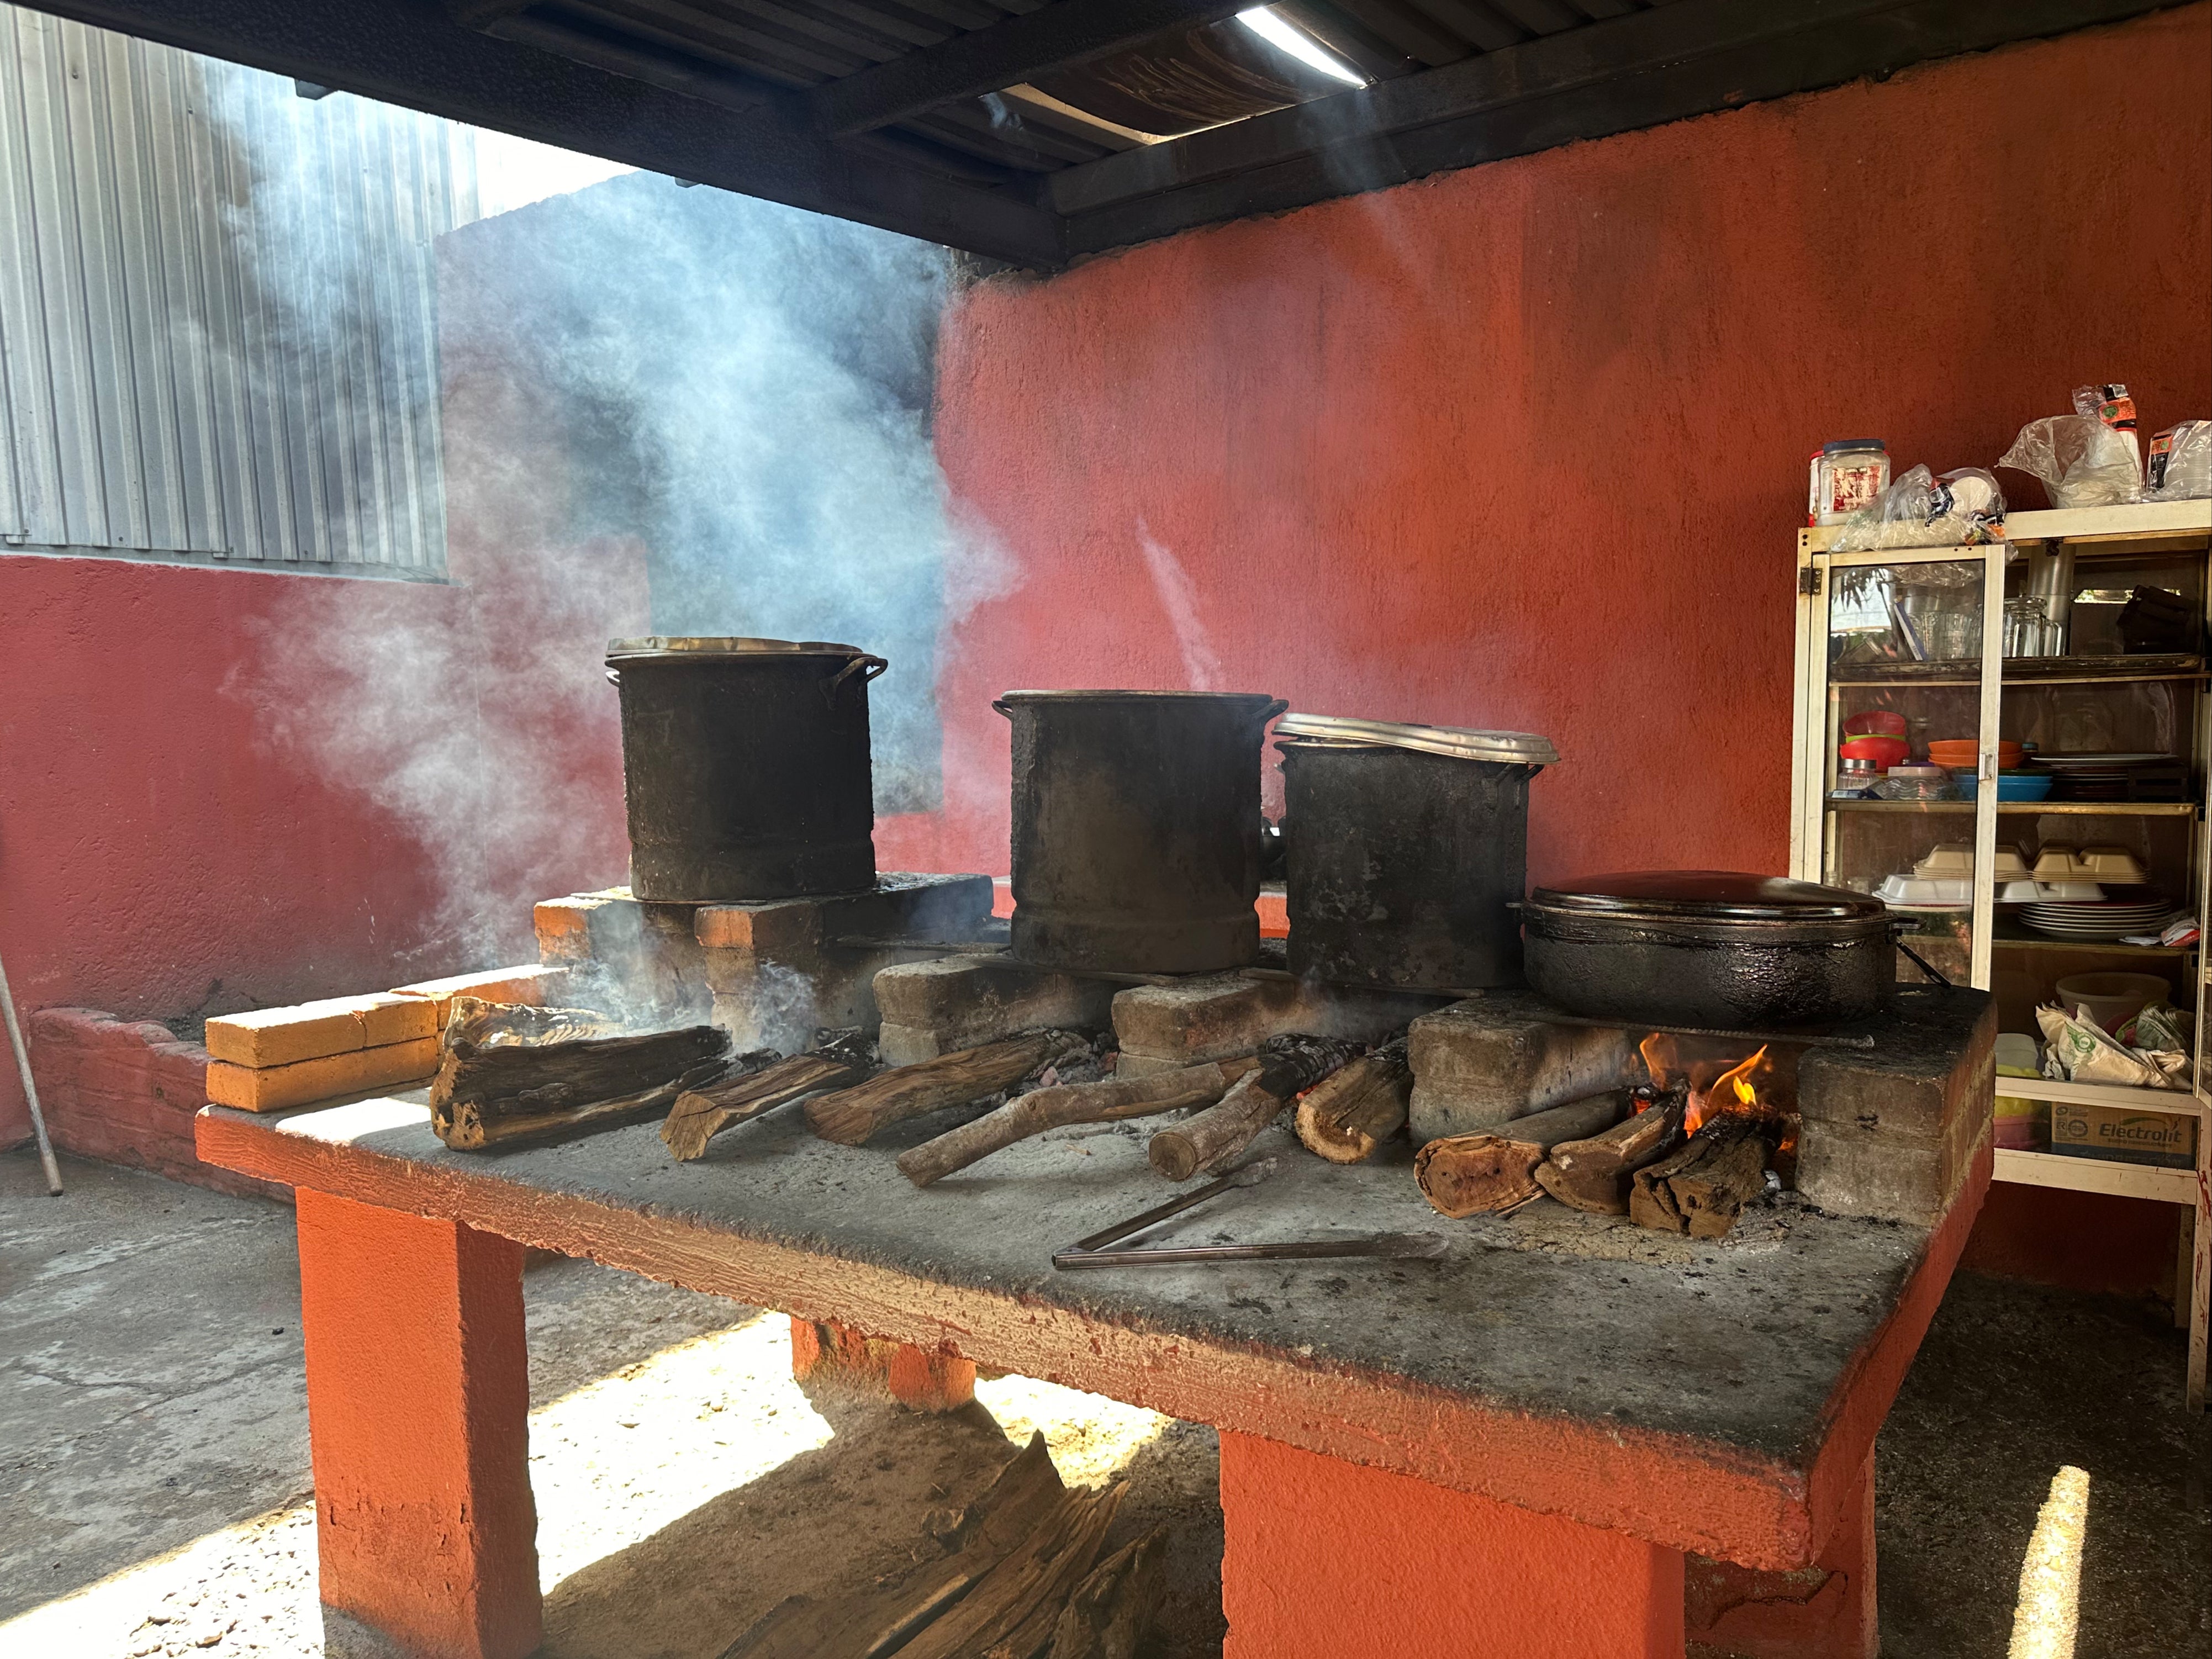 Barbacoa En Que El 40 is run by a father and his two children